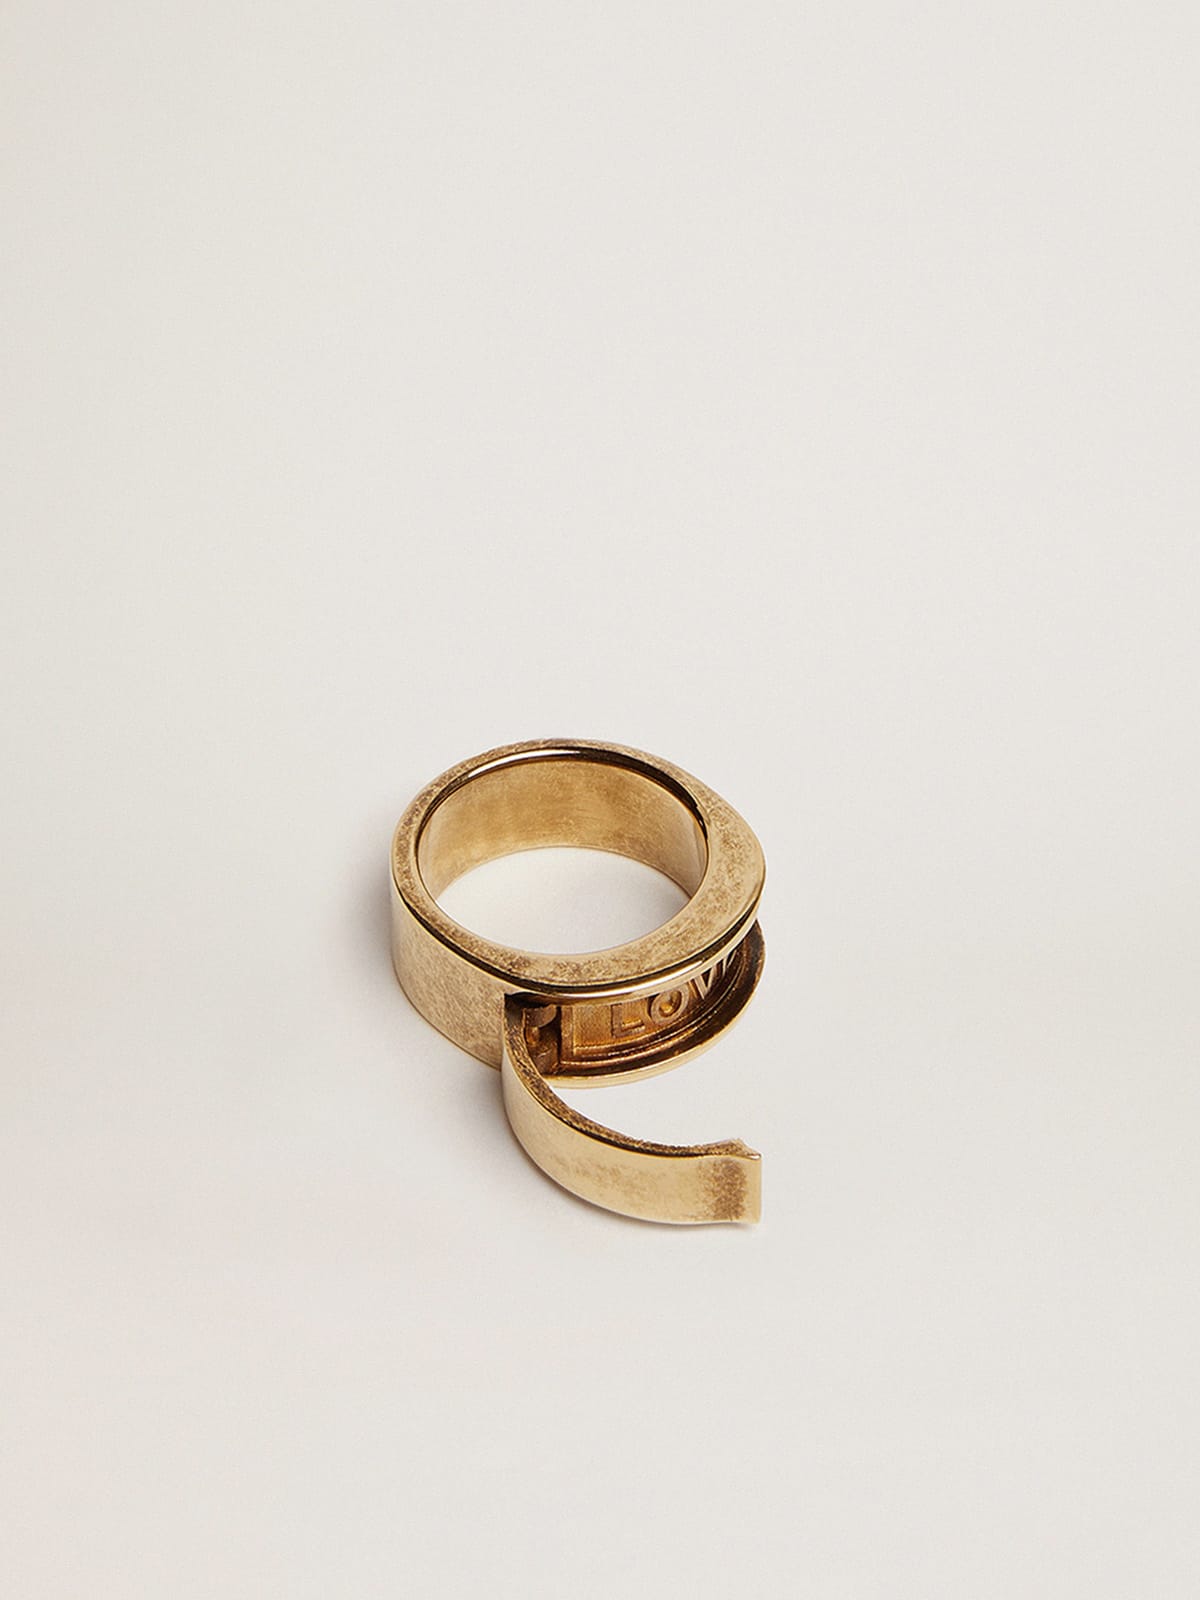 Golden Goose - Ring in old gold color with hidden message in 